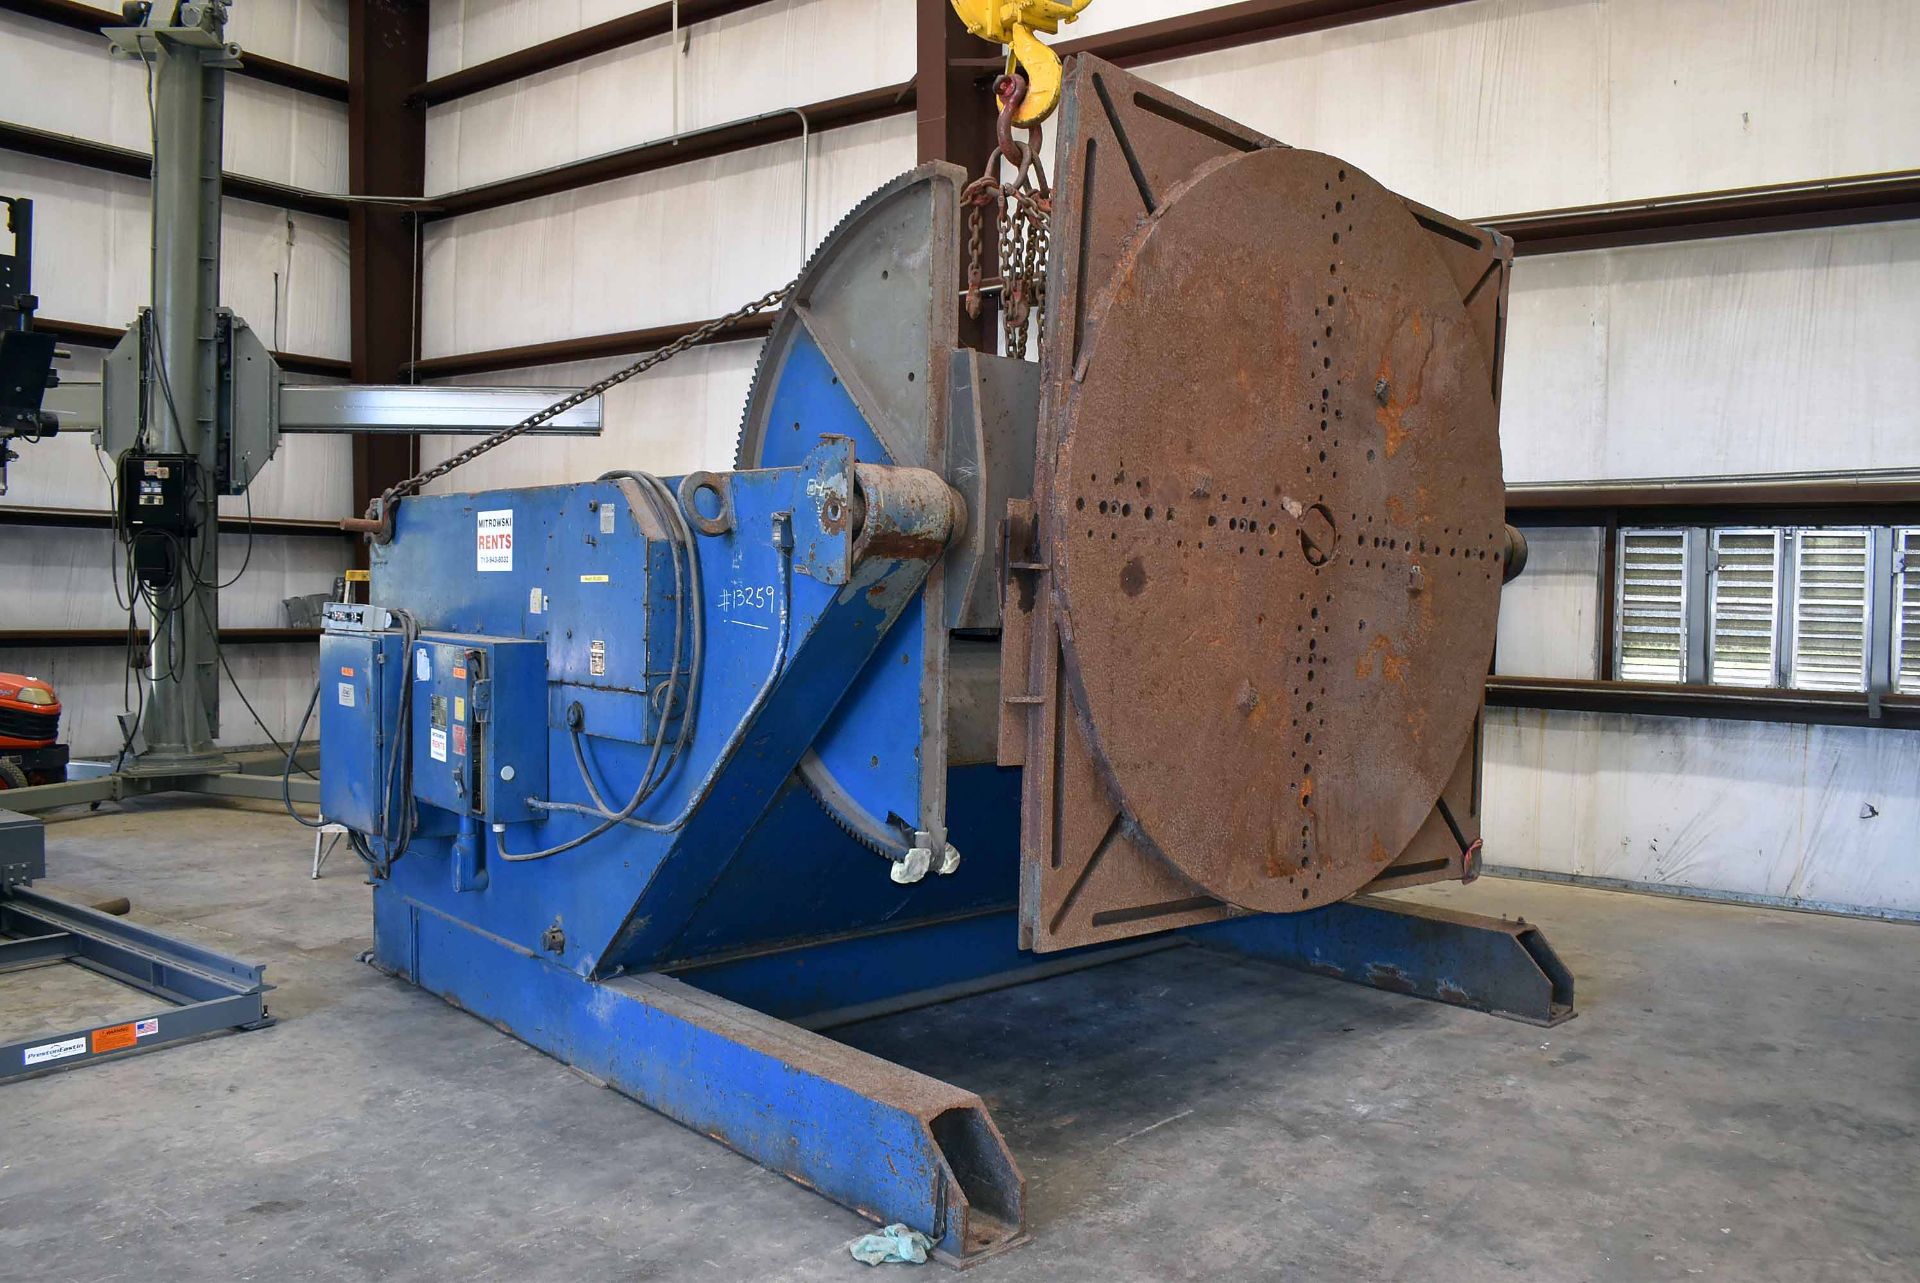 LARGE CAPACITY WELDING POSITIONER, KOIKE ARONSON 95,000 LB. CAP., Mdl. AB-950-96, 96" X 96" square - Image 2 of 11